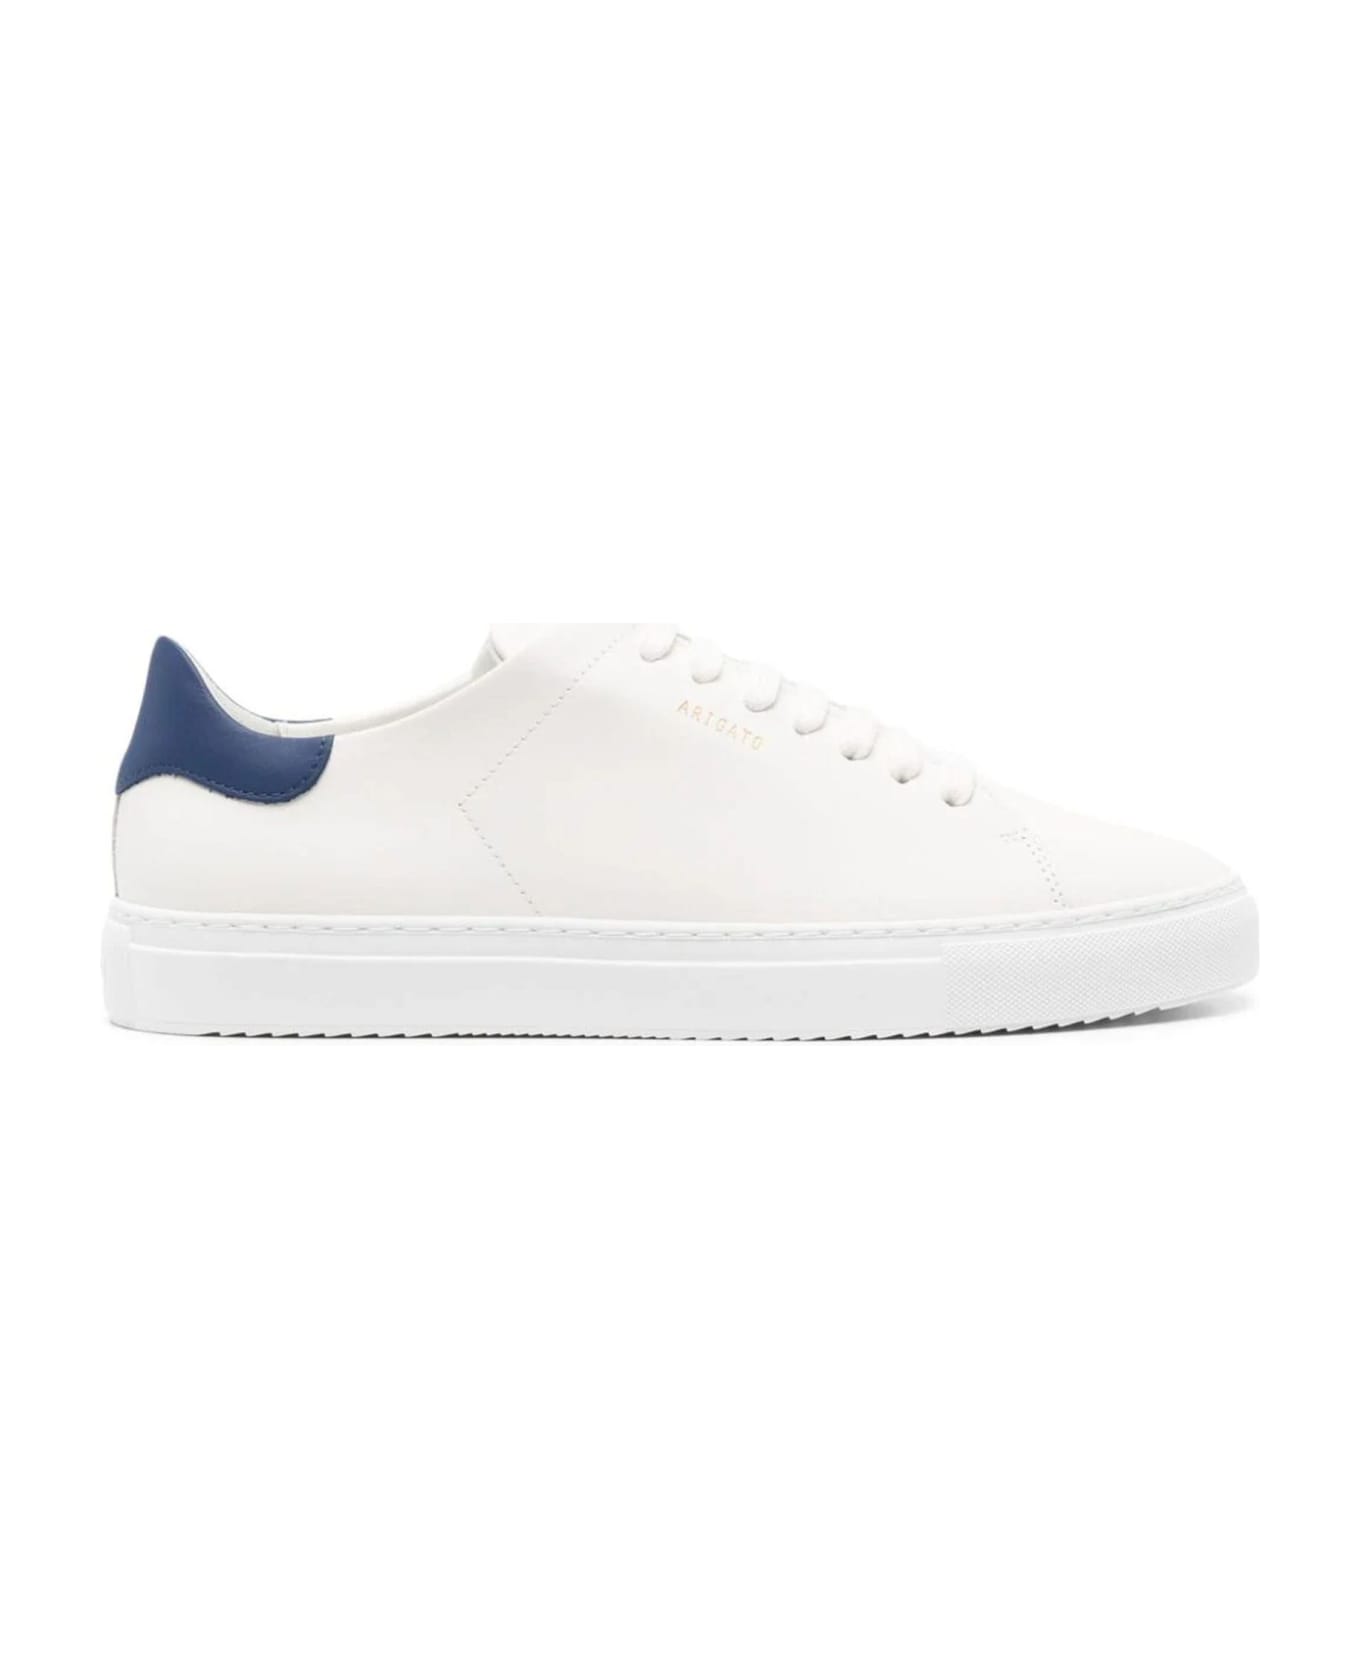 Axel Arigato White Clean 90 Leather Sneakers - White/navy スニーカー